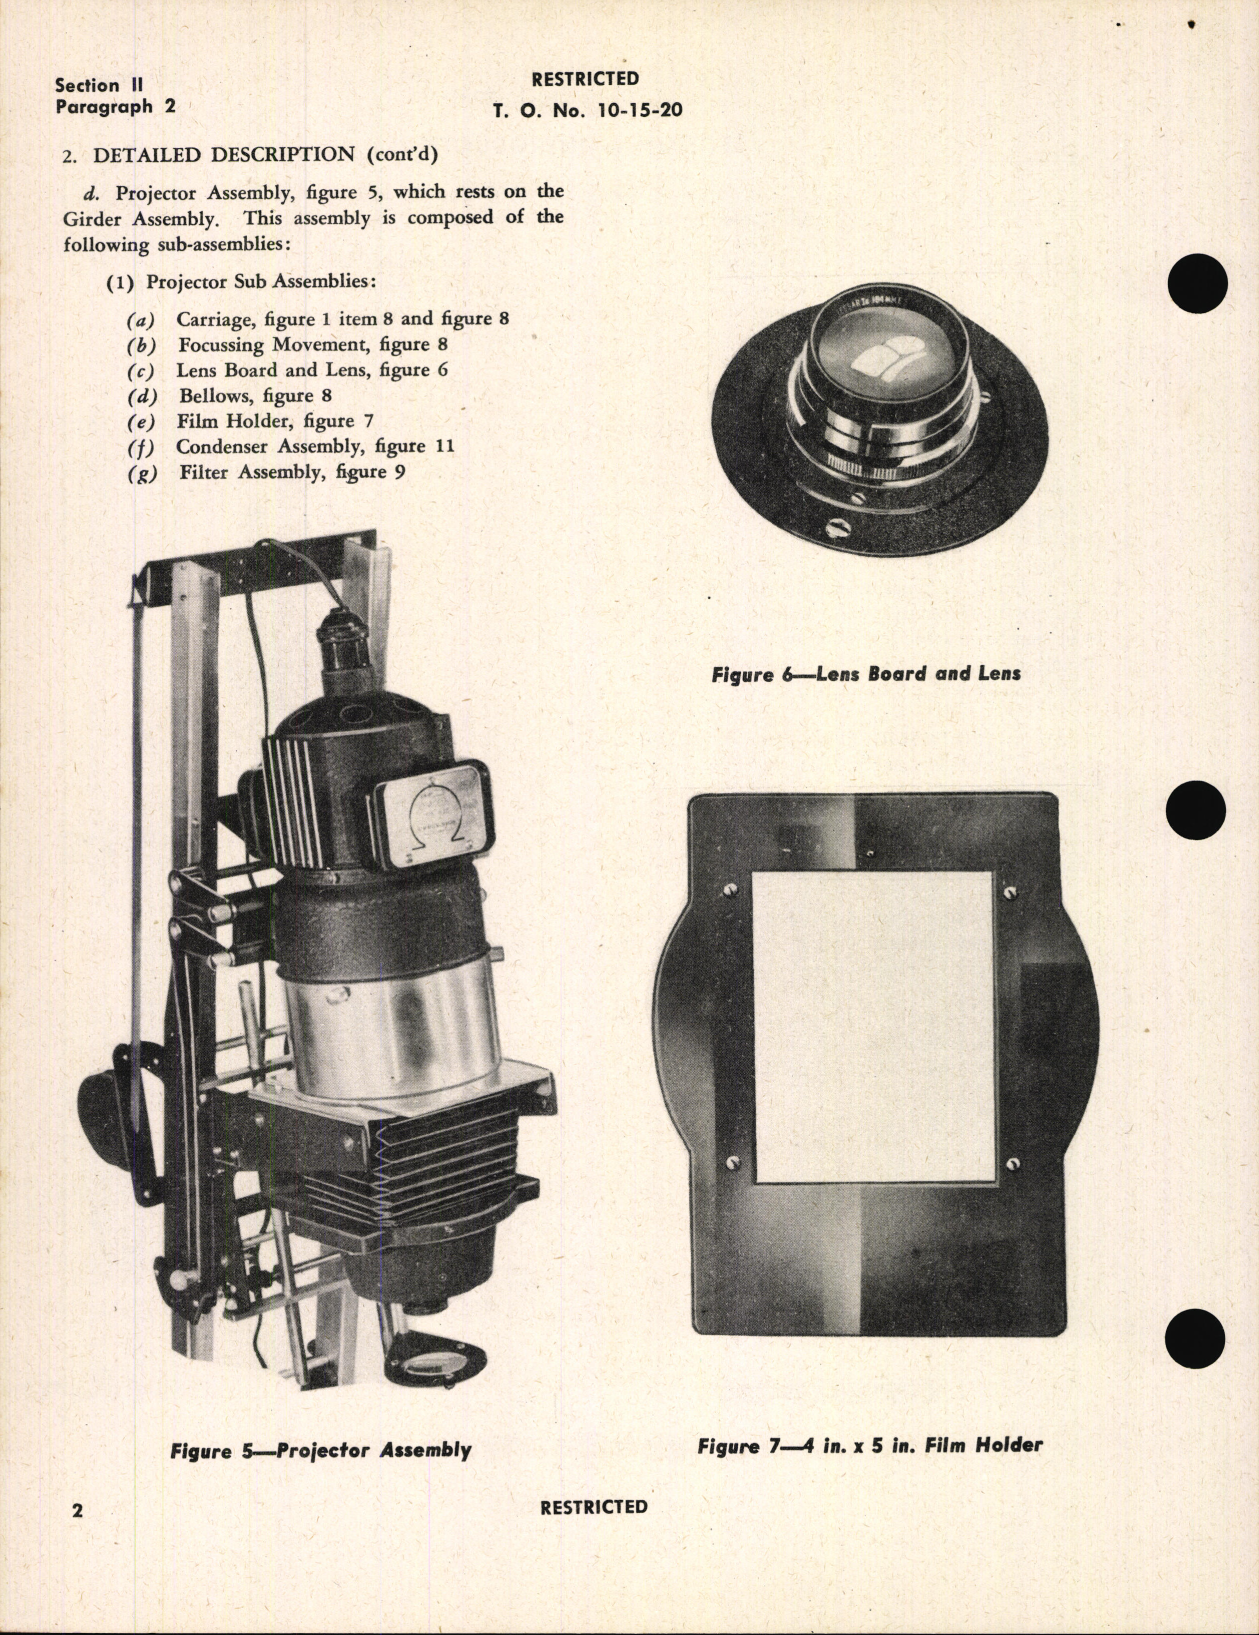 Sample page 8 from AirCorps Library document: Handbook of Instructions with Parts Catalog for Omega D-11 Projection Printer